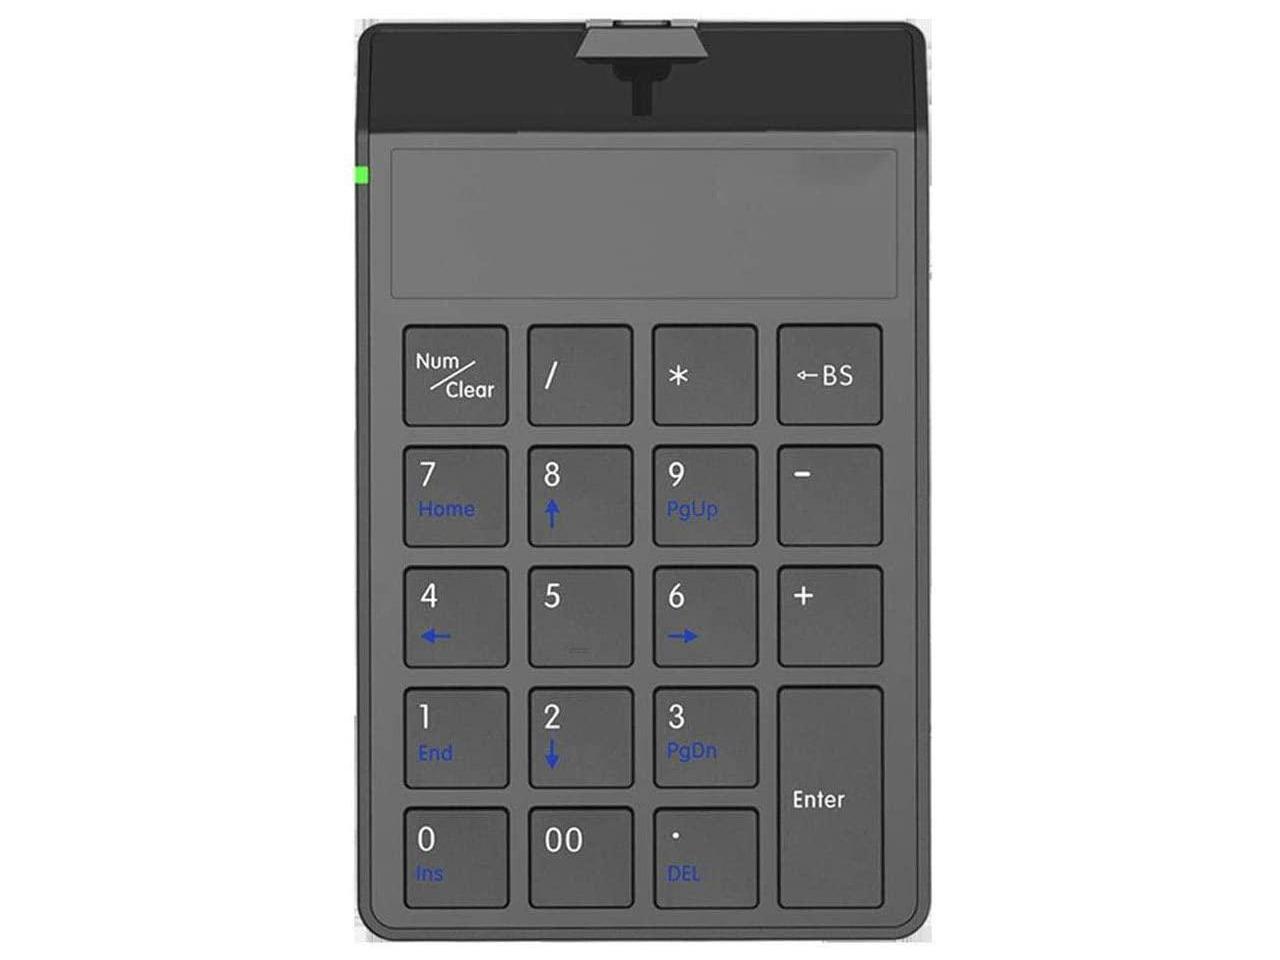 Notebook Keyboards for Laptop XUBIAODIAN Numeric Keypad 19 Keys Portable Numpad with 2.4G USB Receiver Number Pad,Used for Accounting and Data Input Desktop PC 